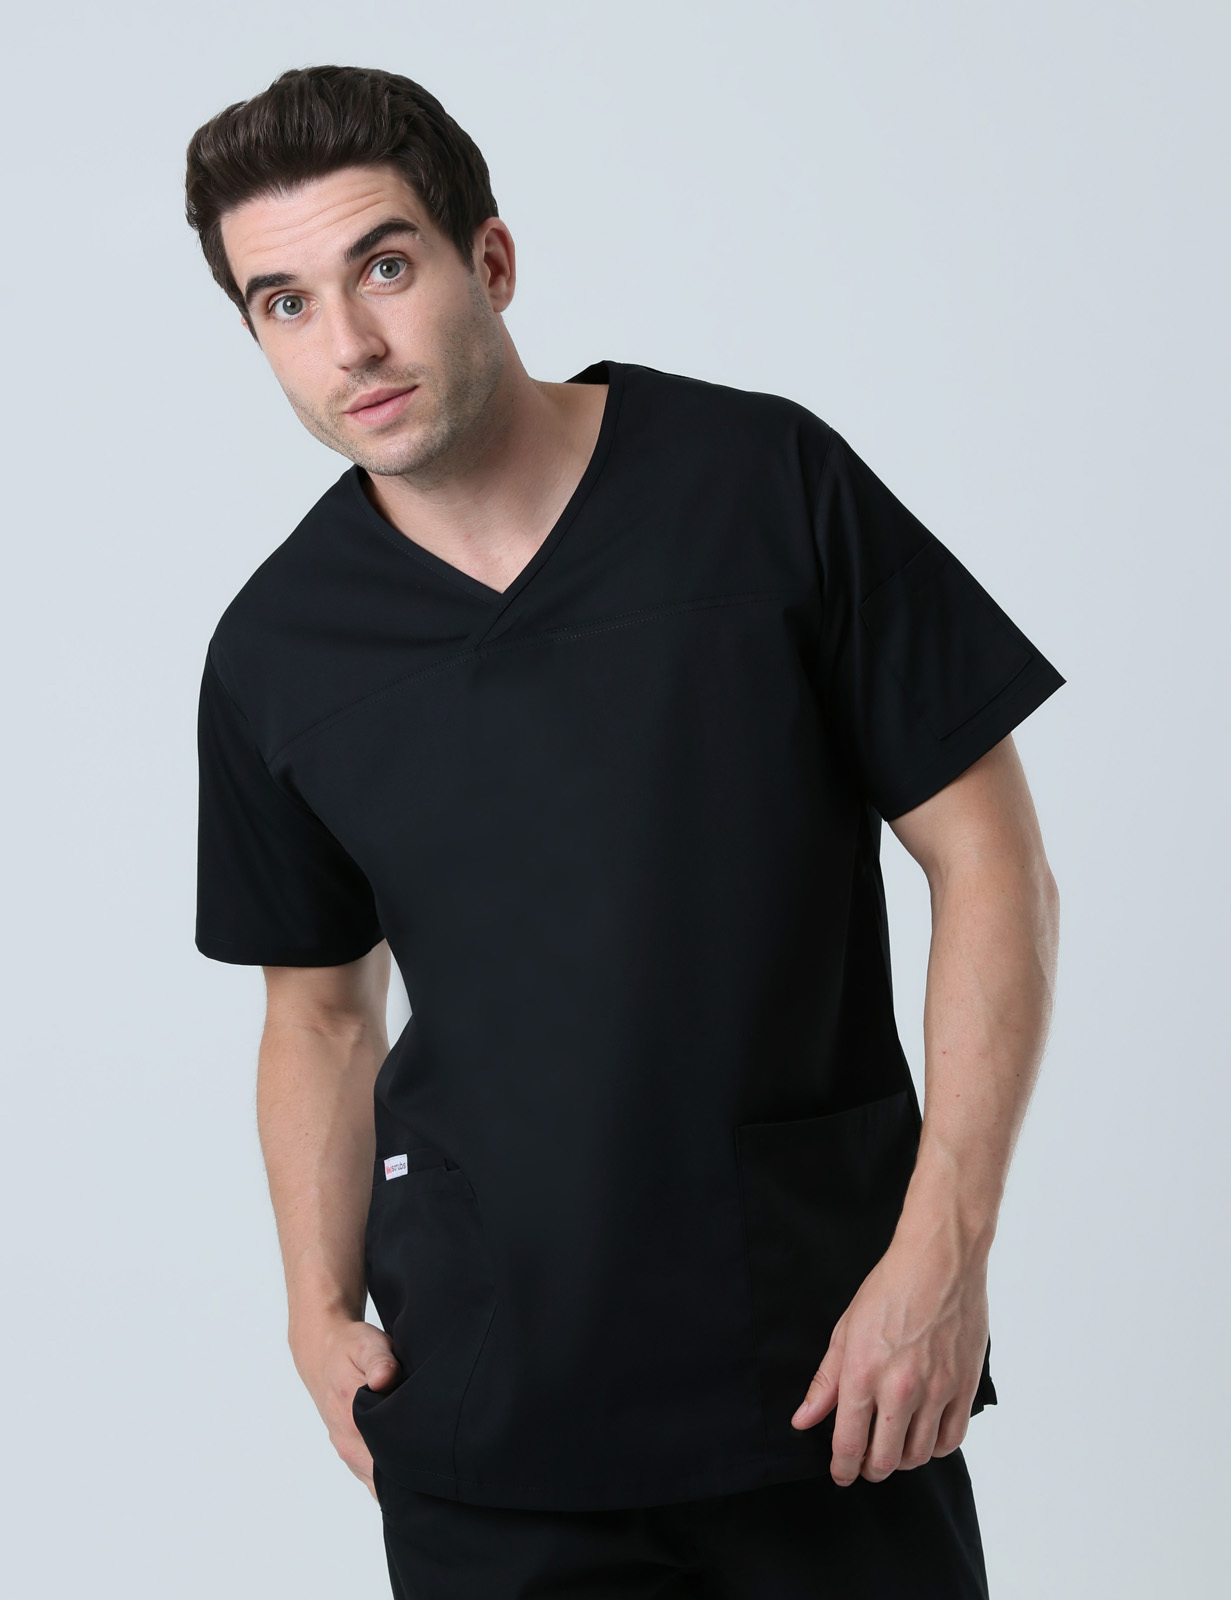 North Shore Private Hospital Radiographer Uniform Top Only Bundle (Men's Fit Solid  Top in Black + Logo)